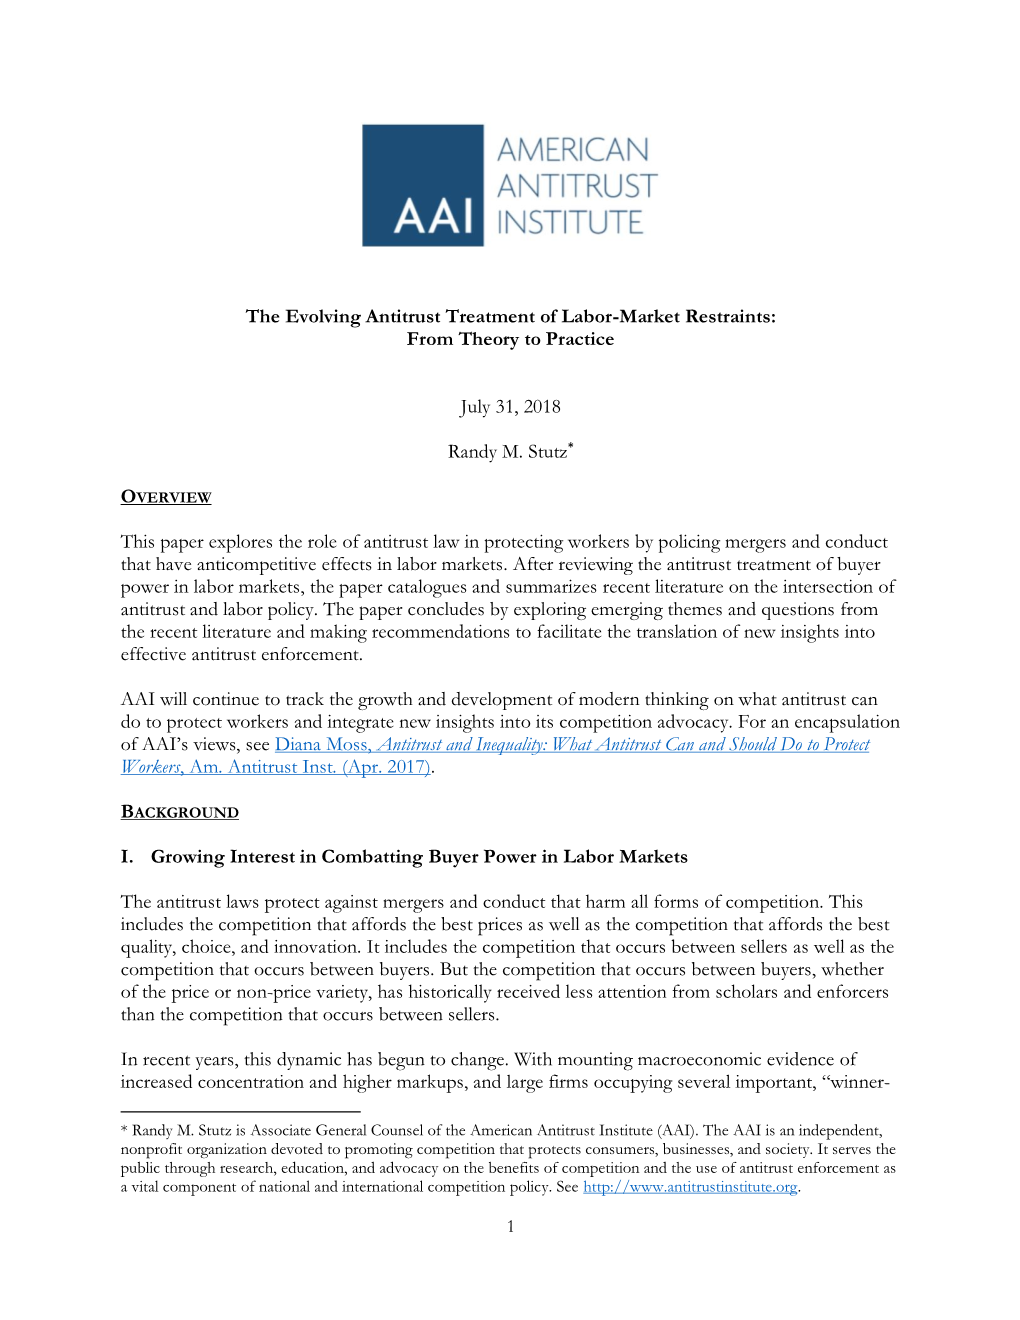 The Evolving Antitrust Treatment of Labor-Market Restraints: from Theory to Practice